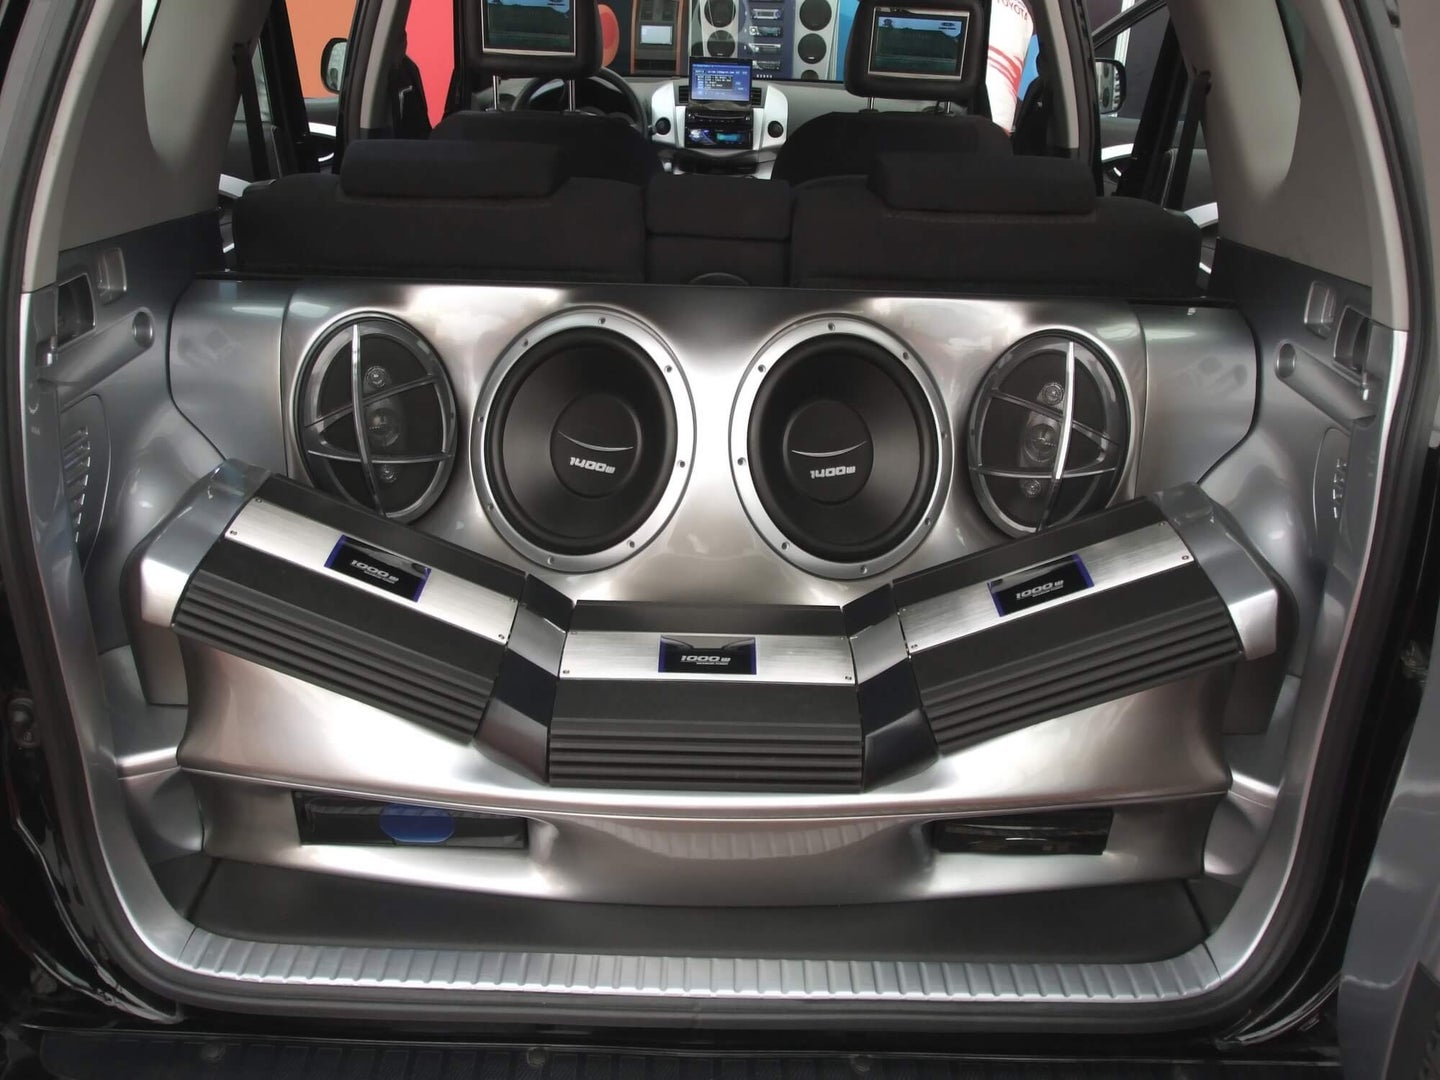 Best Truck Subs: Get Bass You Can Feel